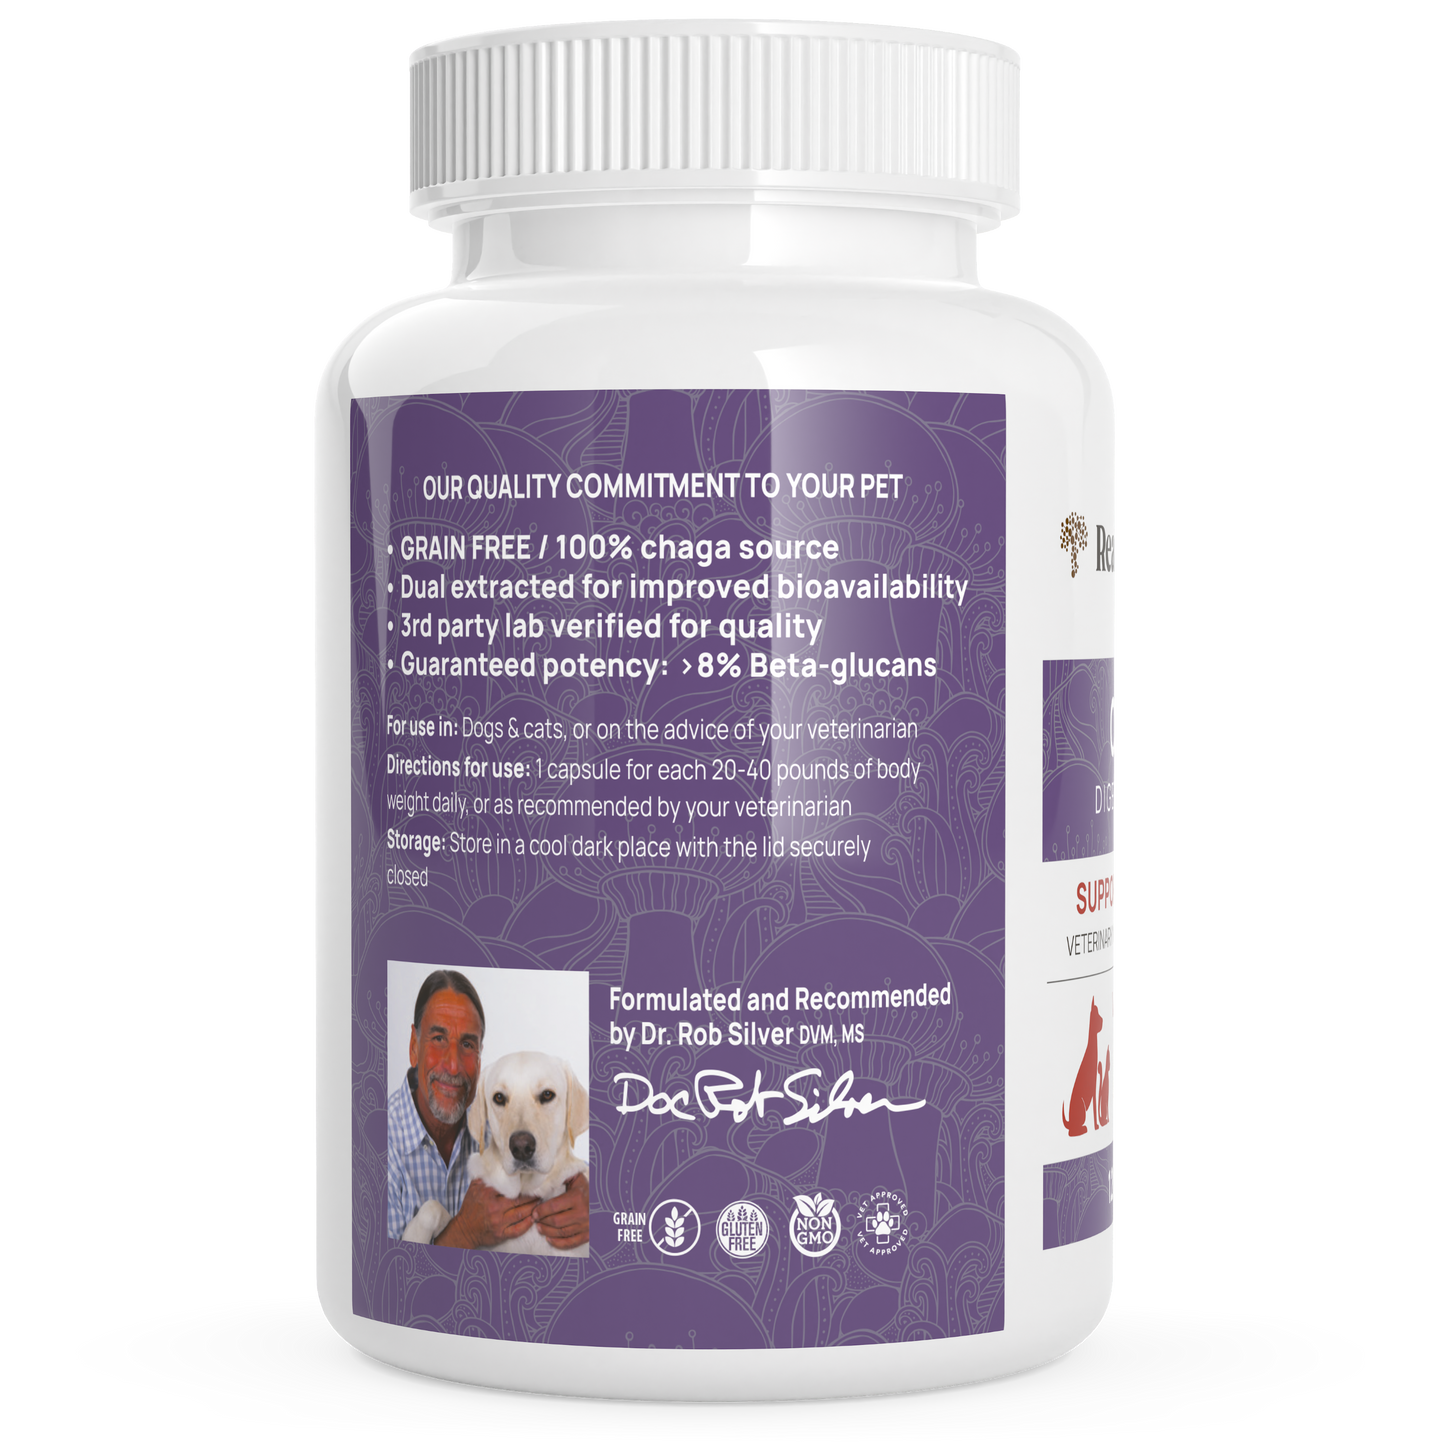 A bottle of Real Mushrooms Organic Chaga Extract Capsules for Pets with a picture of a dog.